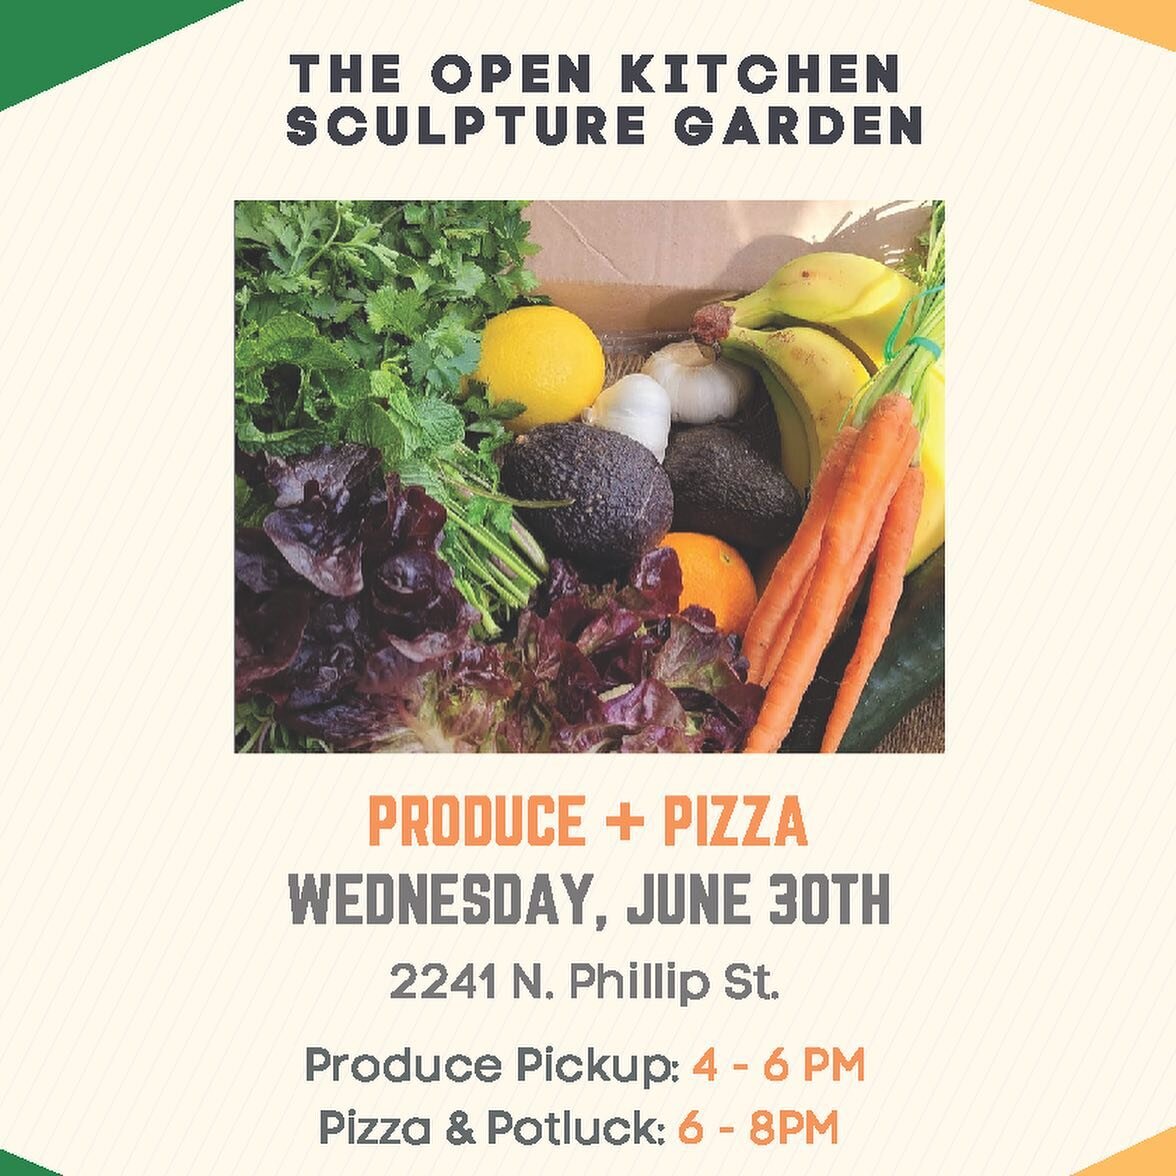 Kicking off a new bi-weekly distro/potluck this Wednesday at the Open Kitchen Sculpture Garden located on 2241 N. Phillip St! Join us for pizza and produce until 8pm! Keep swipin&rsquo; for this weeks distro schedule.

#mutualaid #freefood #freeprodu